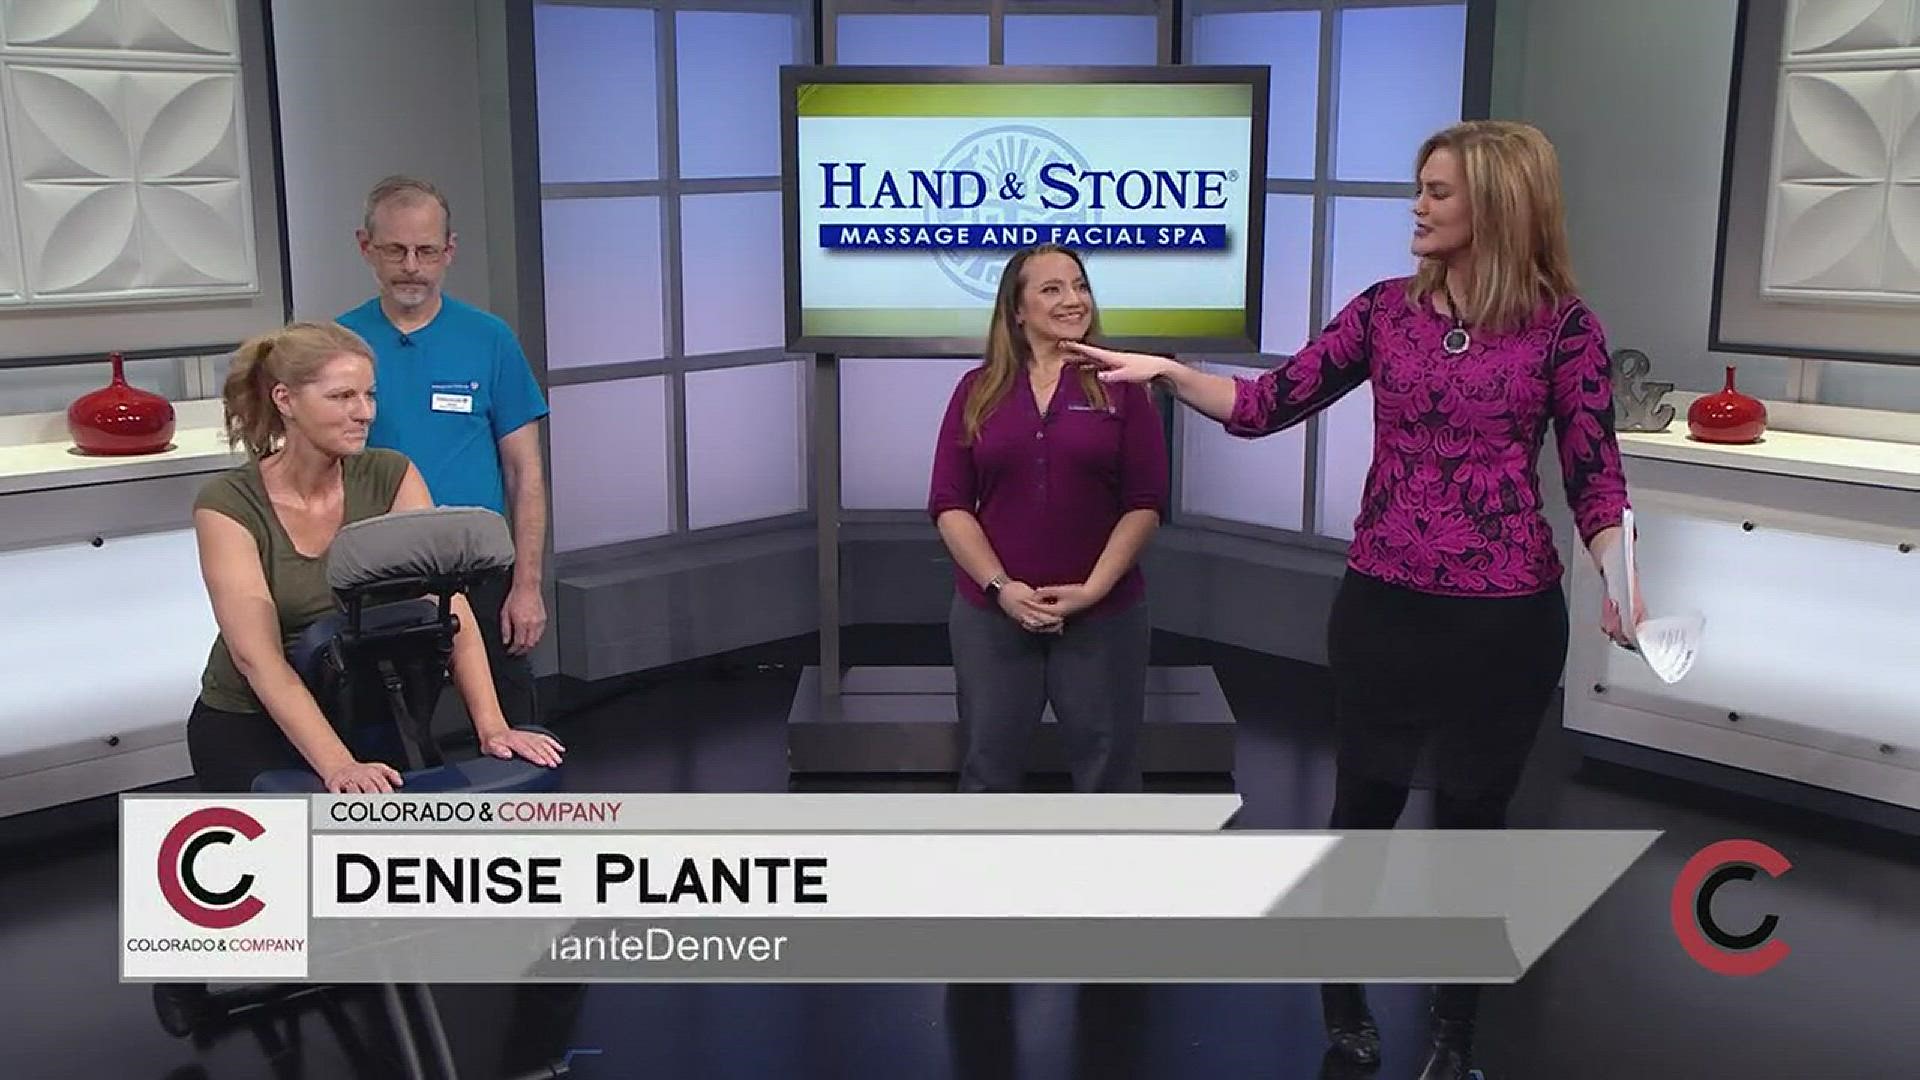 The gift of relaxation from Hand and Stone is always a good idea. Take advantage of their Unwrap and Unwind gift card specials. Save $10 on spa gift cards and $20 on spa gift packages right now. Find Hand and Stone locations and get all the info at www.HandAndStone.com. 
THIS INTERVIEW HAS COMMERCIAL CONTENT. PRODUCTS AND SERVICES FEATURED APPEAR AS PAID ADVERTISING